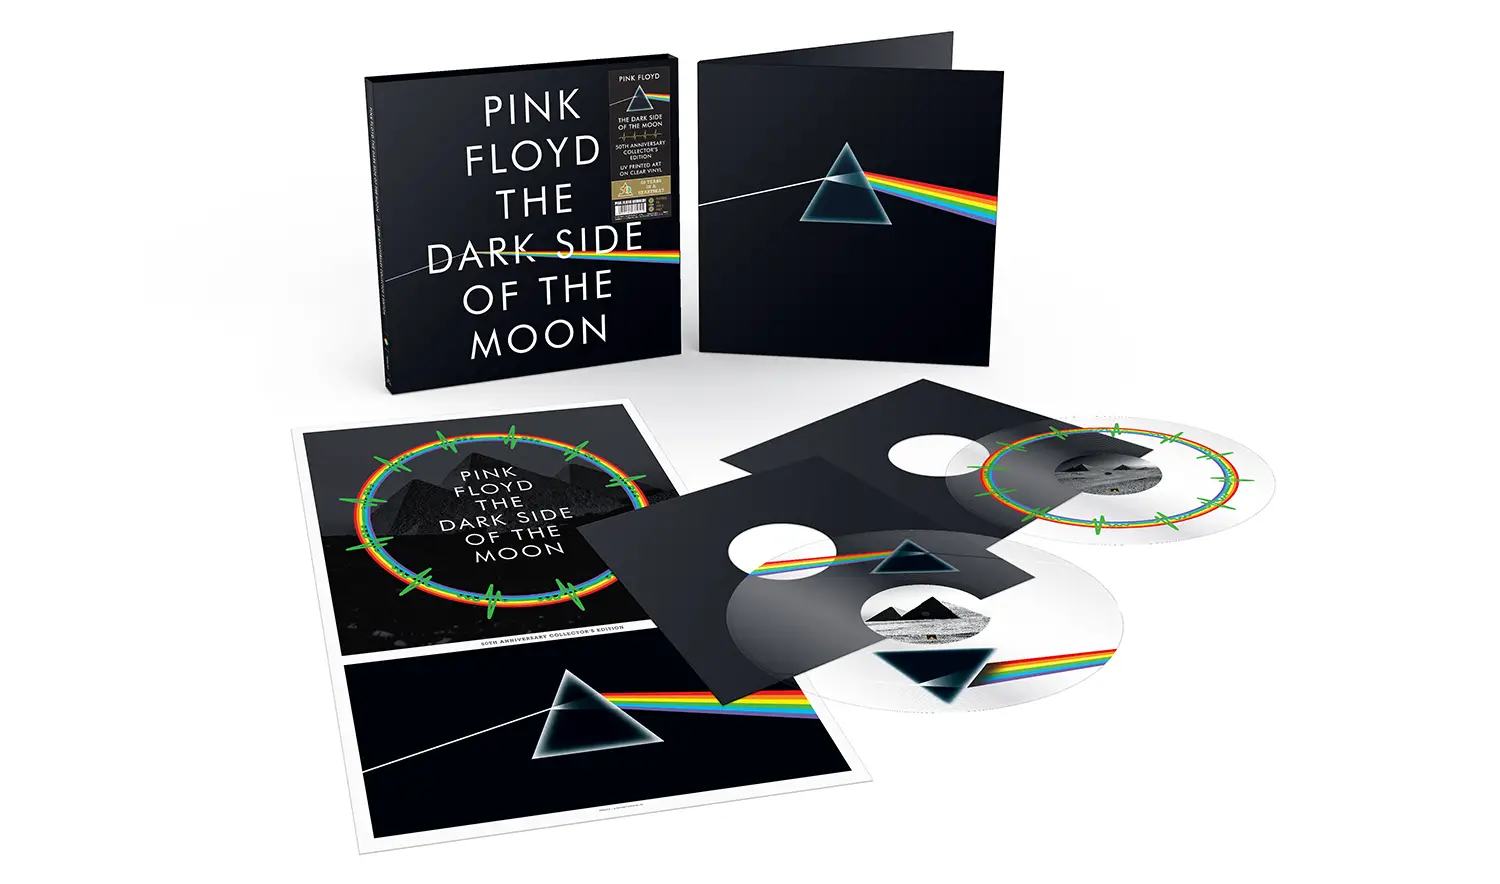 A Collectors Edition of Pink Floyd’s 'Dark Side of the Moon' is Releasing on Clear Vinyl | News | LIVING LIFE FEARLESS